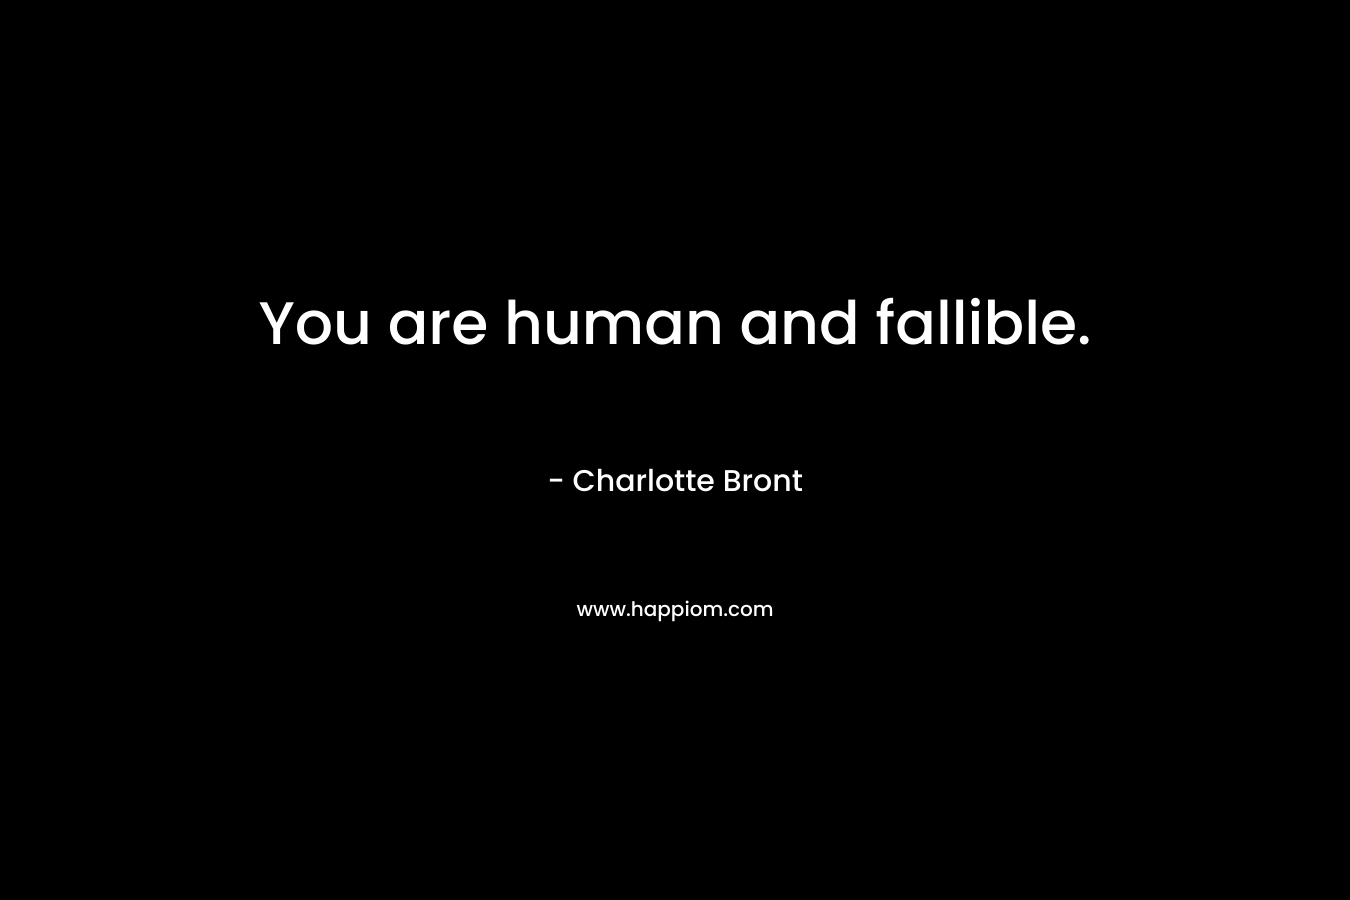 You are human and fallible.